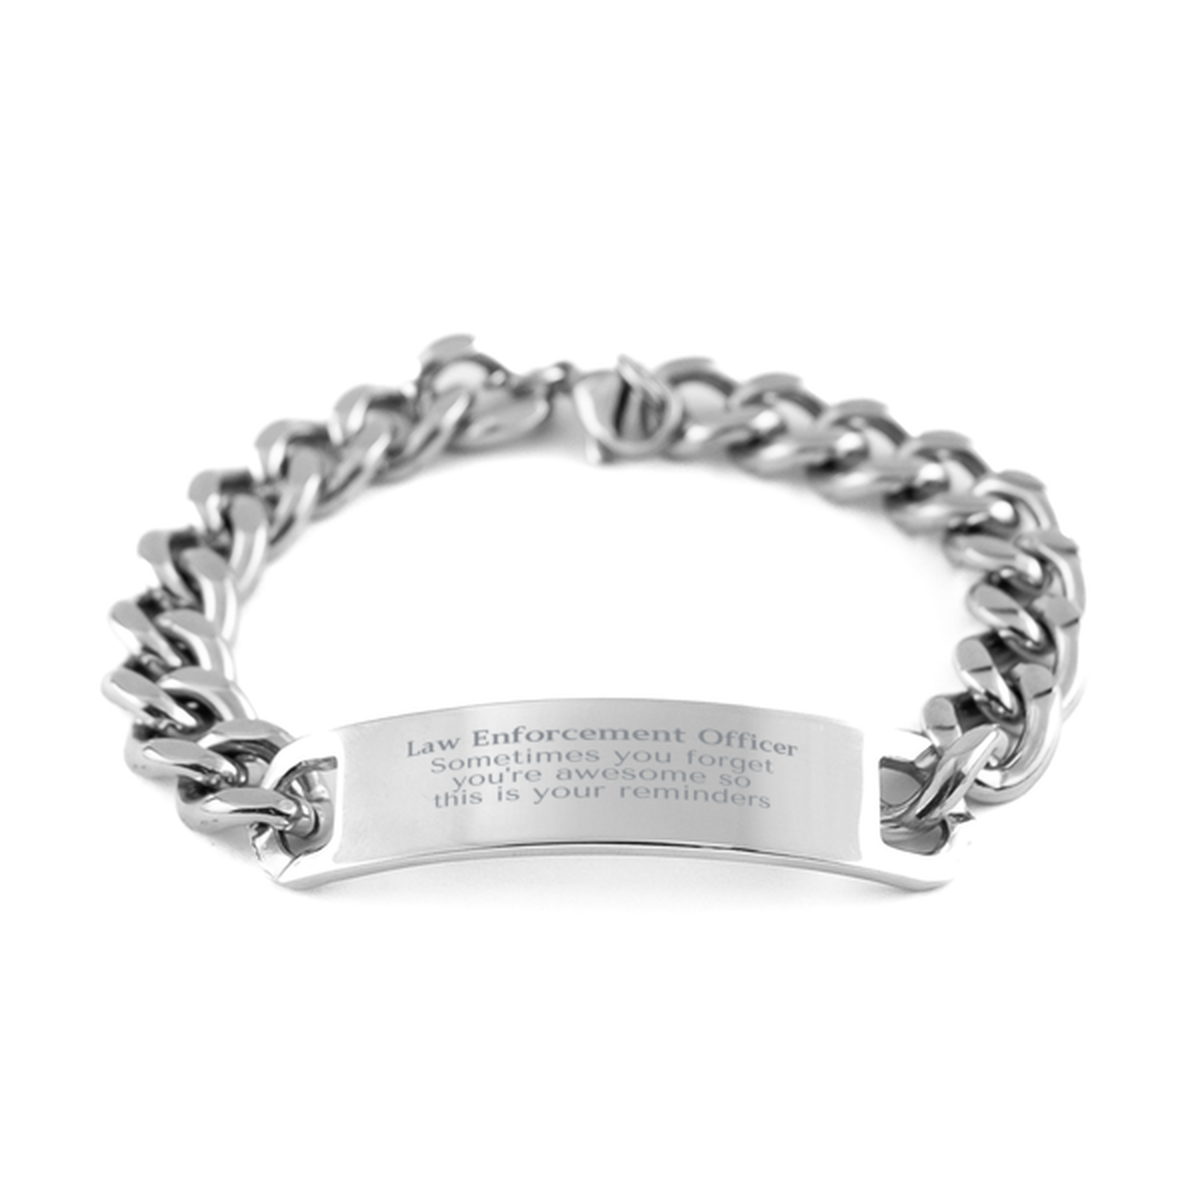 Sentimental Law Enforcement Officer Cuban Chain Stainless Steel Bracelet, Law Enforcement Officer Sometimes you forget you're awesome so this is your reminders, Graduation Christmas Birthday Gifts for Law Enforcement Officer, Men, Women, Coworkers